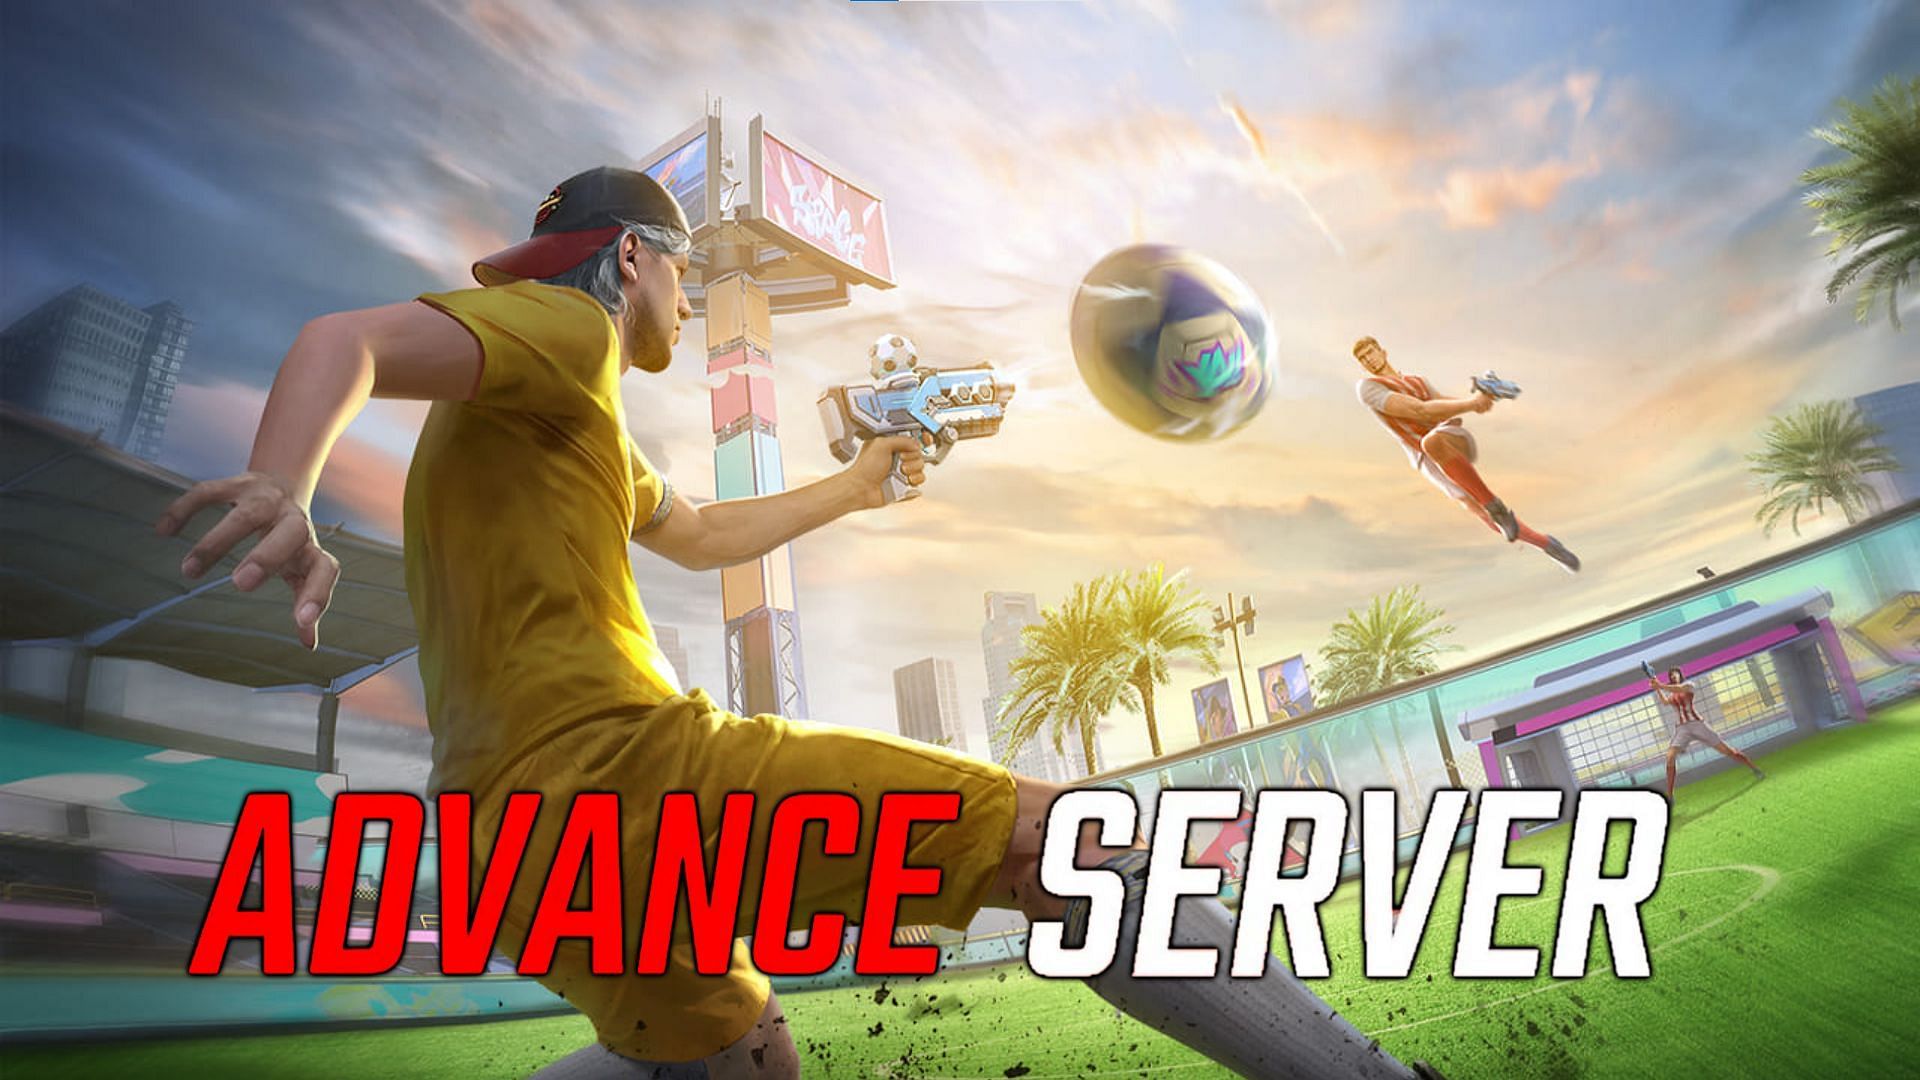 FREE FIRE ADVANCE SERVER DOWNLOAD, HOW TO DOWNLOAD ADVANCE SERVER FREE  FIRE OB39